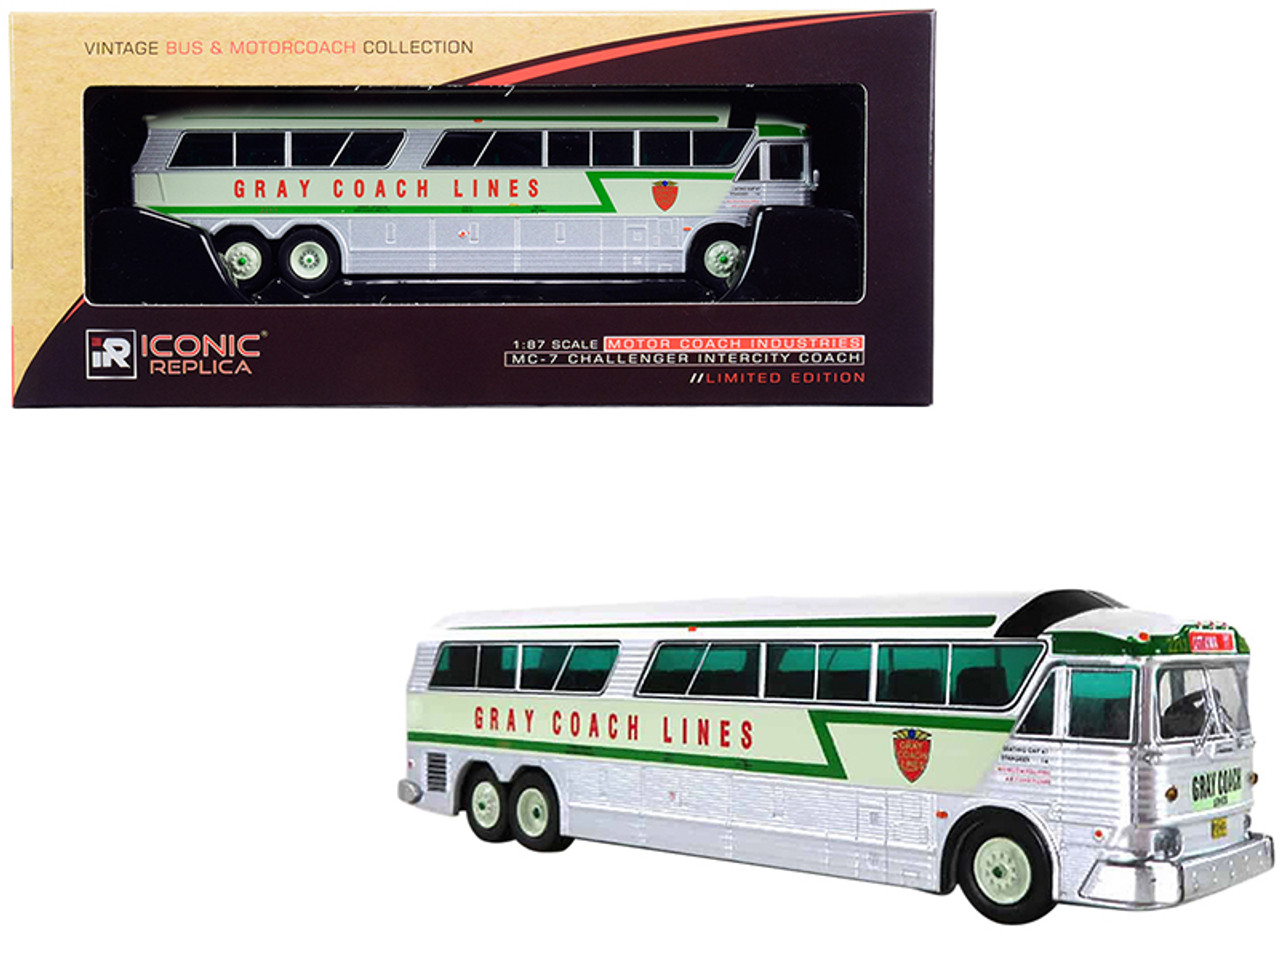 1970 MCI MC-7 Challenger Intercity Motorcoach "Gray Coach Lines" "Destination: Ottawa" (Canada) Green and Silver "Vintage Bus & Motorcoach Collection" 1/87 (HO) Diecast Model by Iconic Replicas